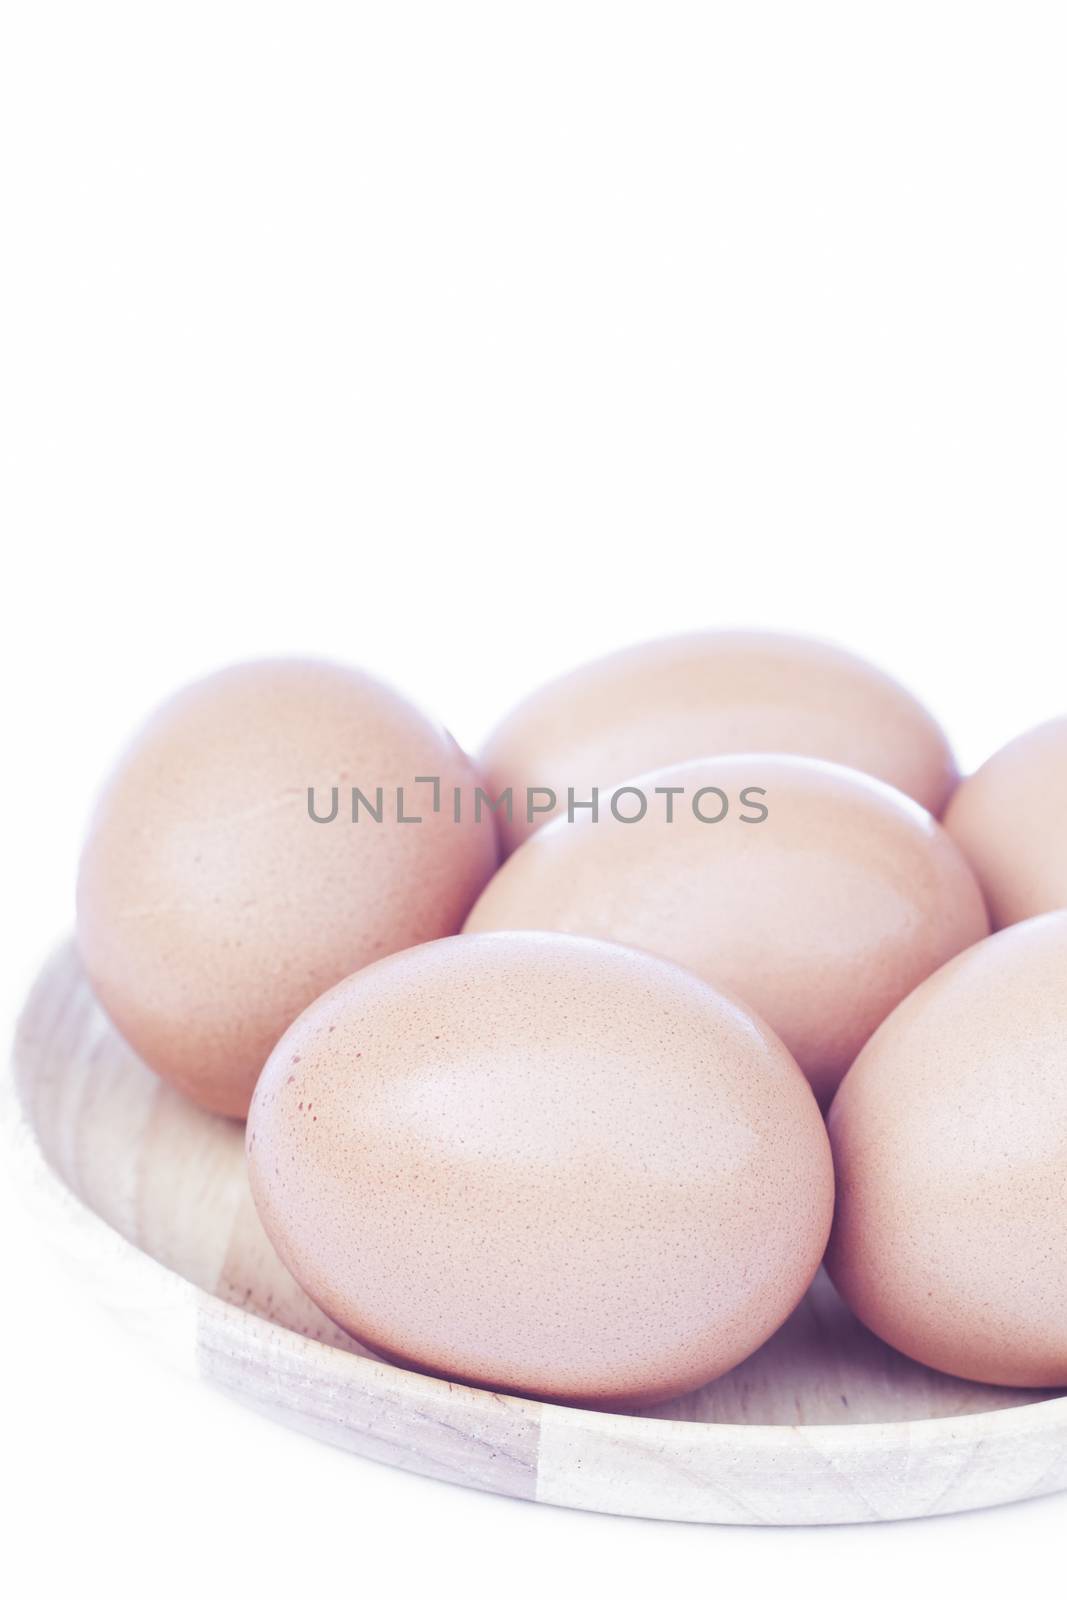 Eggs isolated on white background by punsayaporn